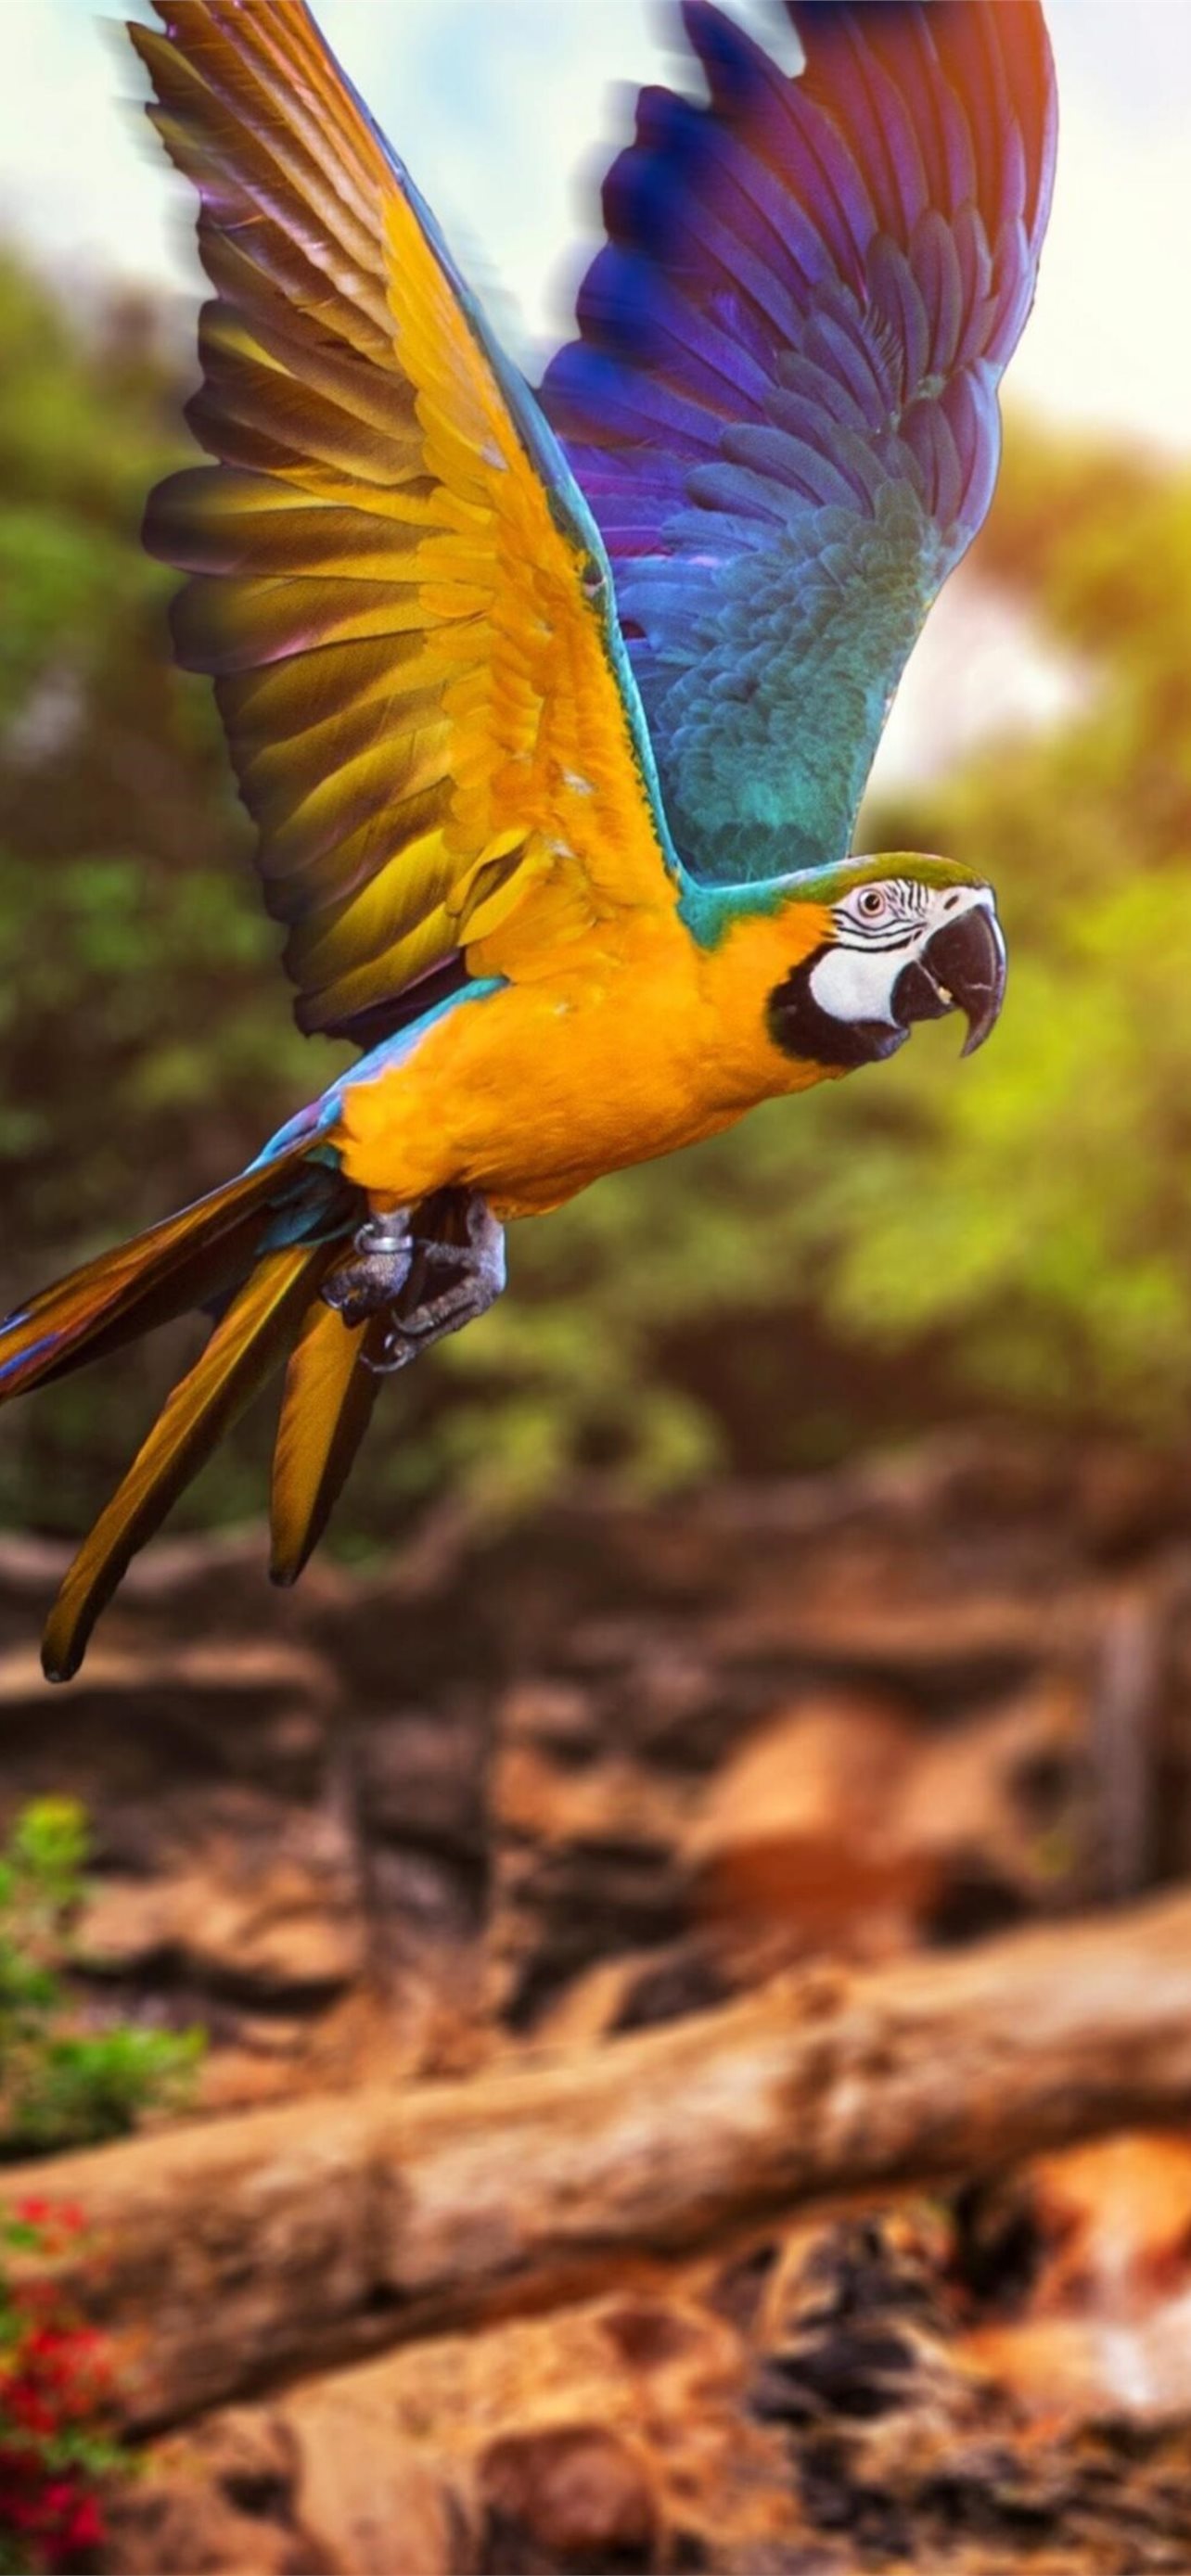 Colorful Parrot 4k Samsung Galaxy Note 9 8 S9 S8 S... iPhone Wallpapers  Free Download